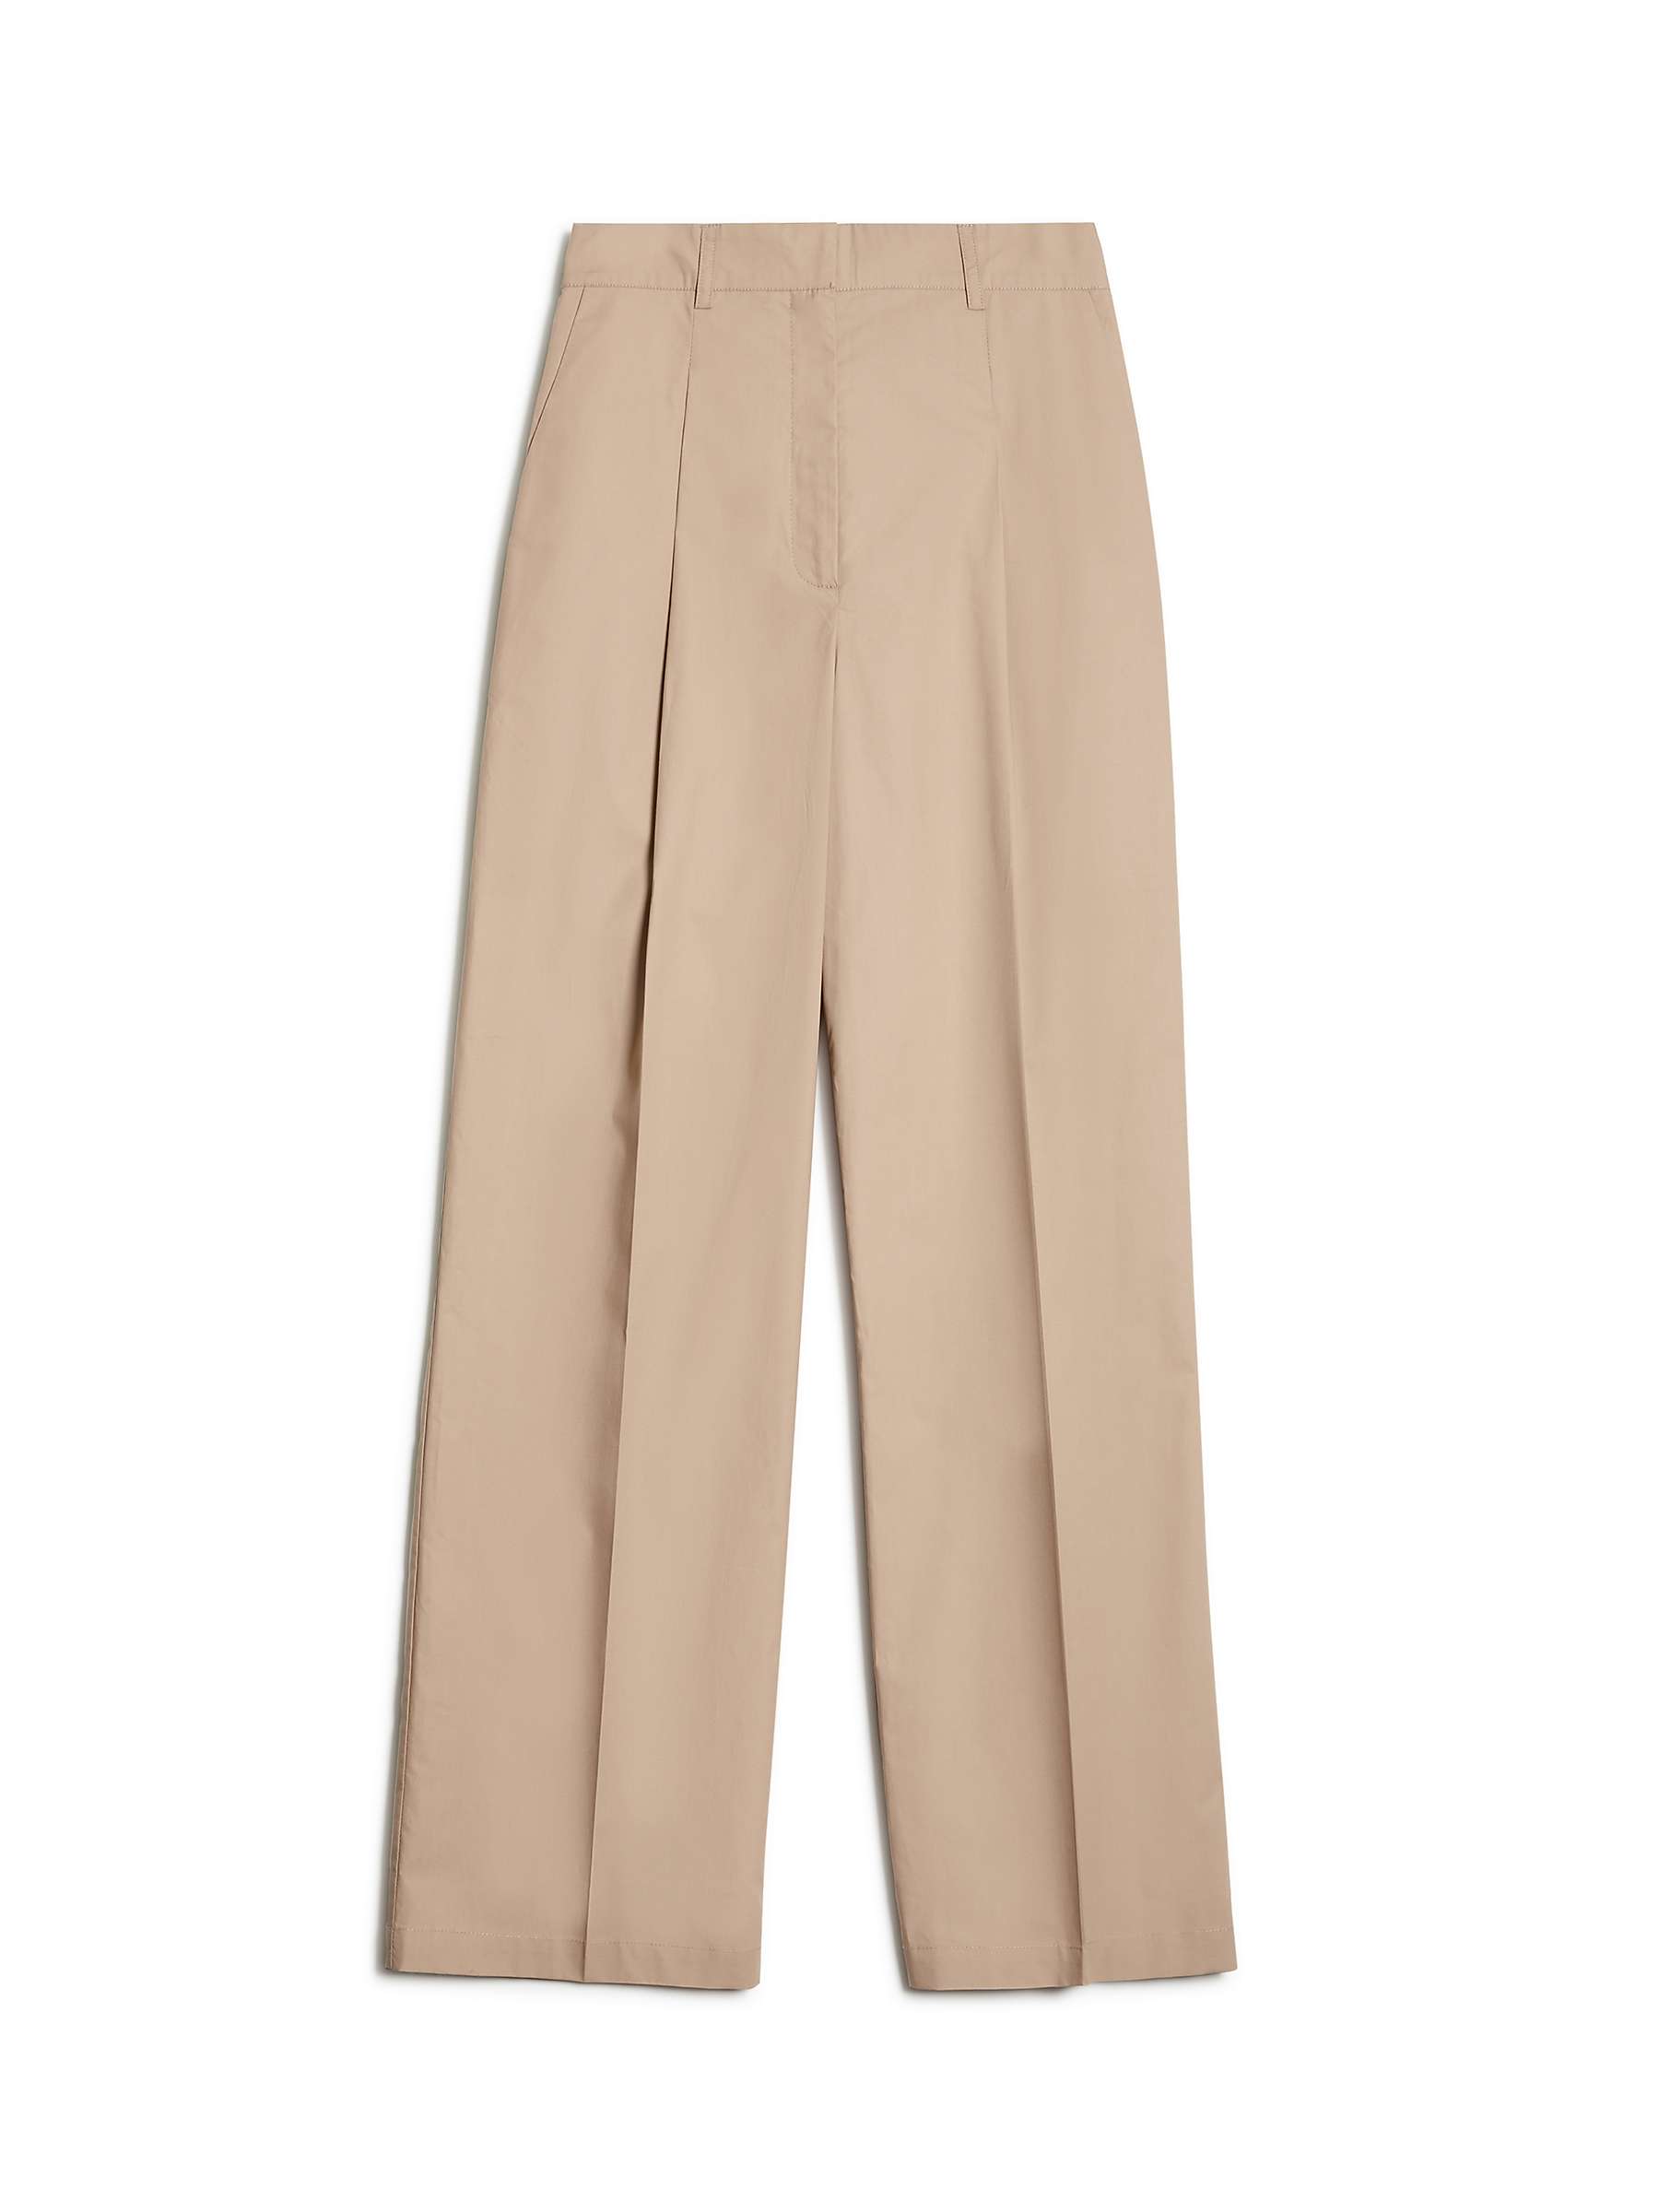 Buy Albaray Organic Cotton Puddle Trouser, Stone Online at johnlewis.com